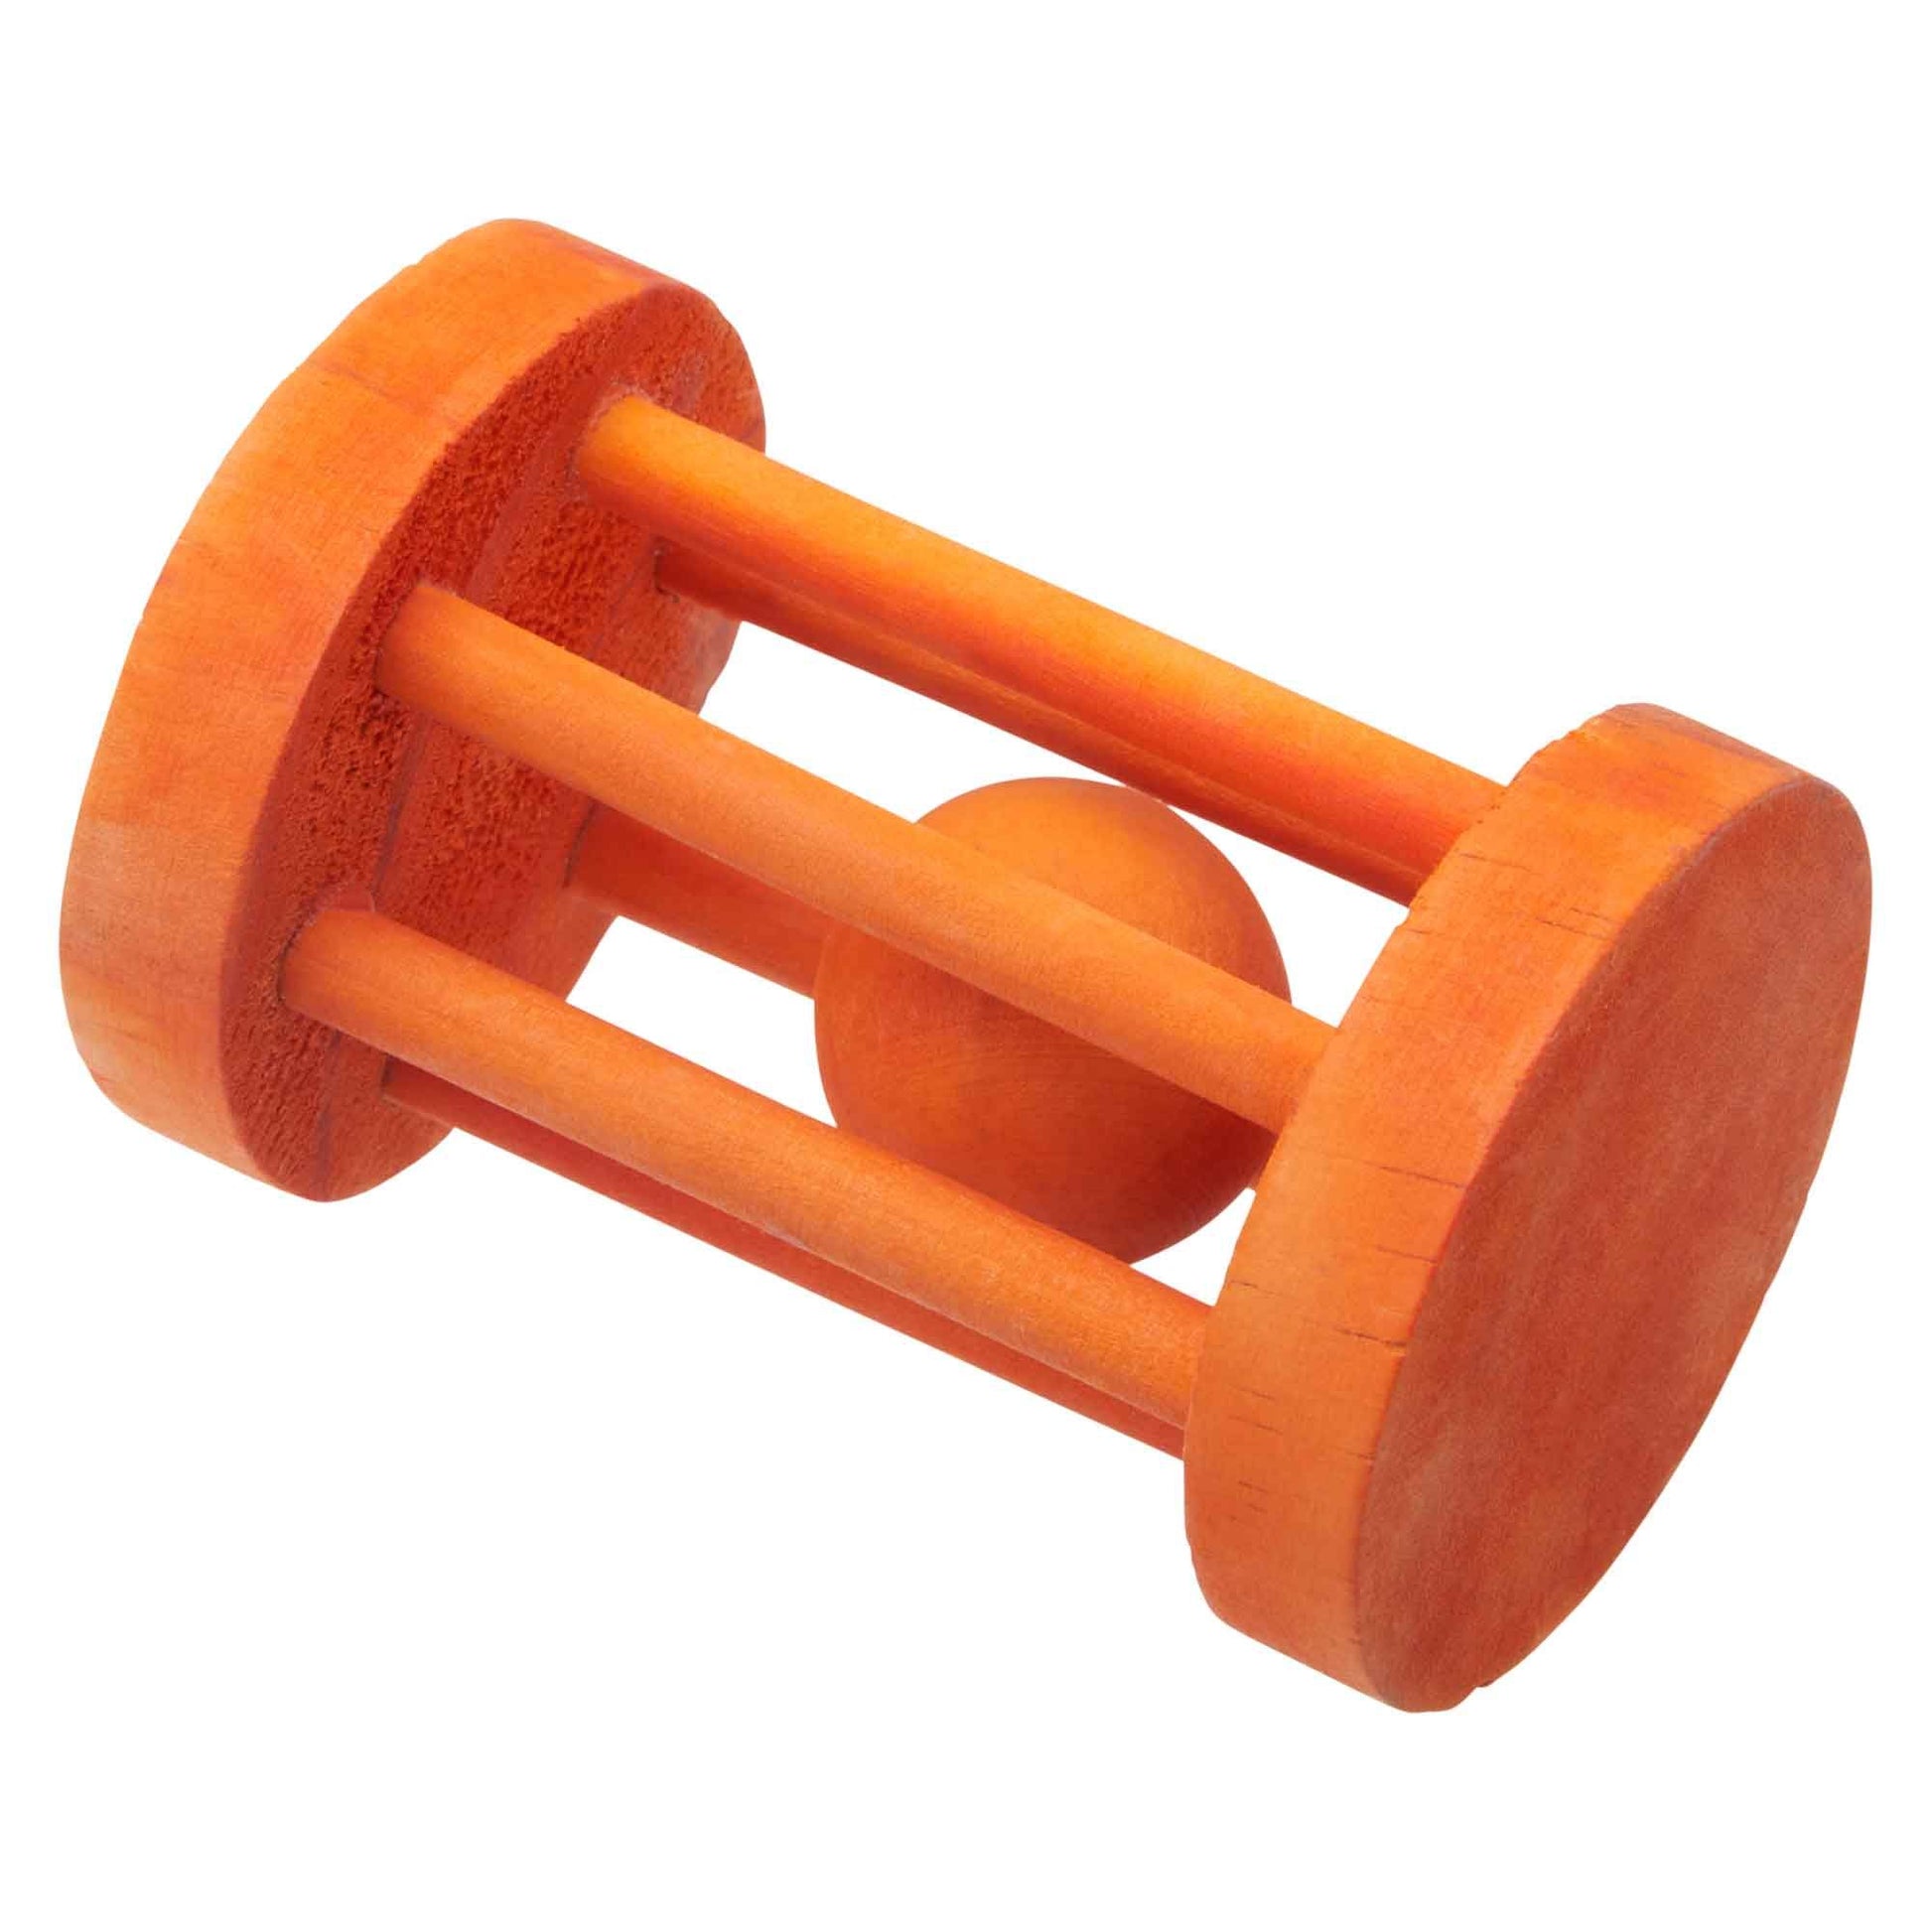 Lexi & Me Small Animal Wooden Chew Toy Rolling Barrel (100000024605) [default_color]